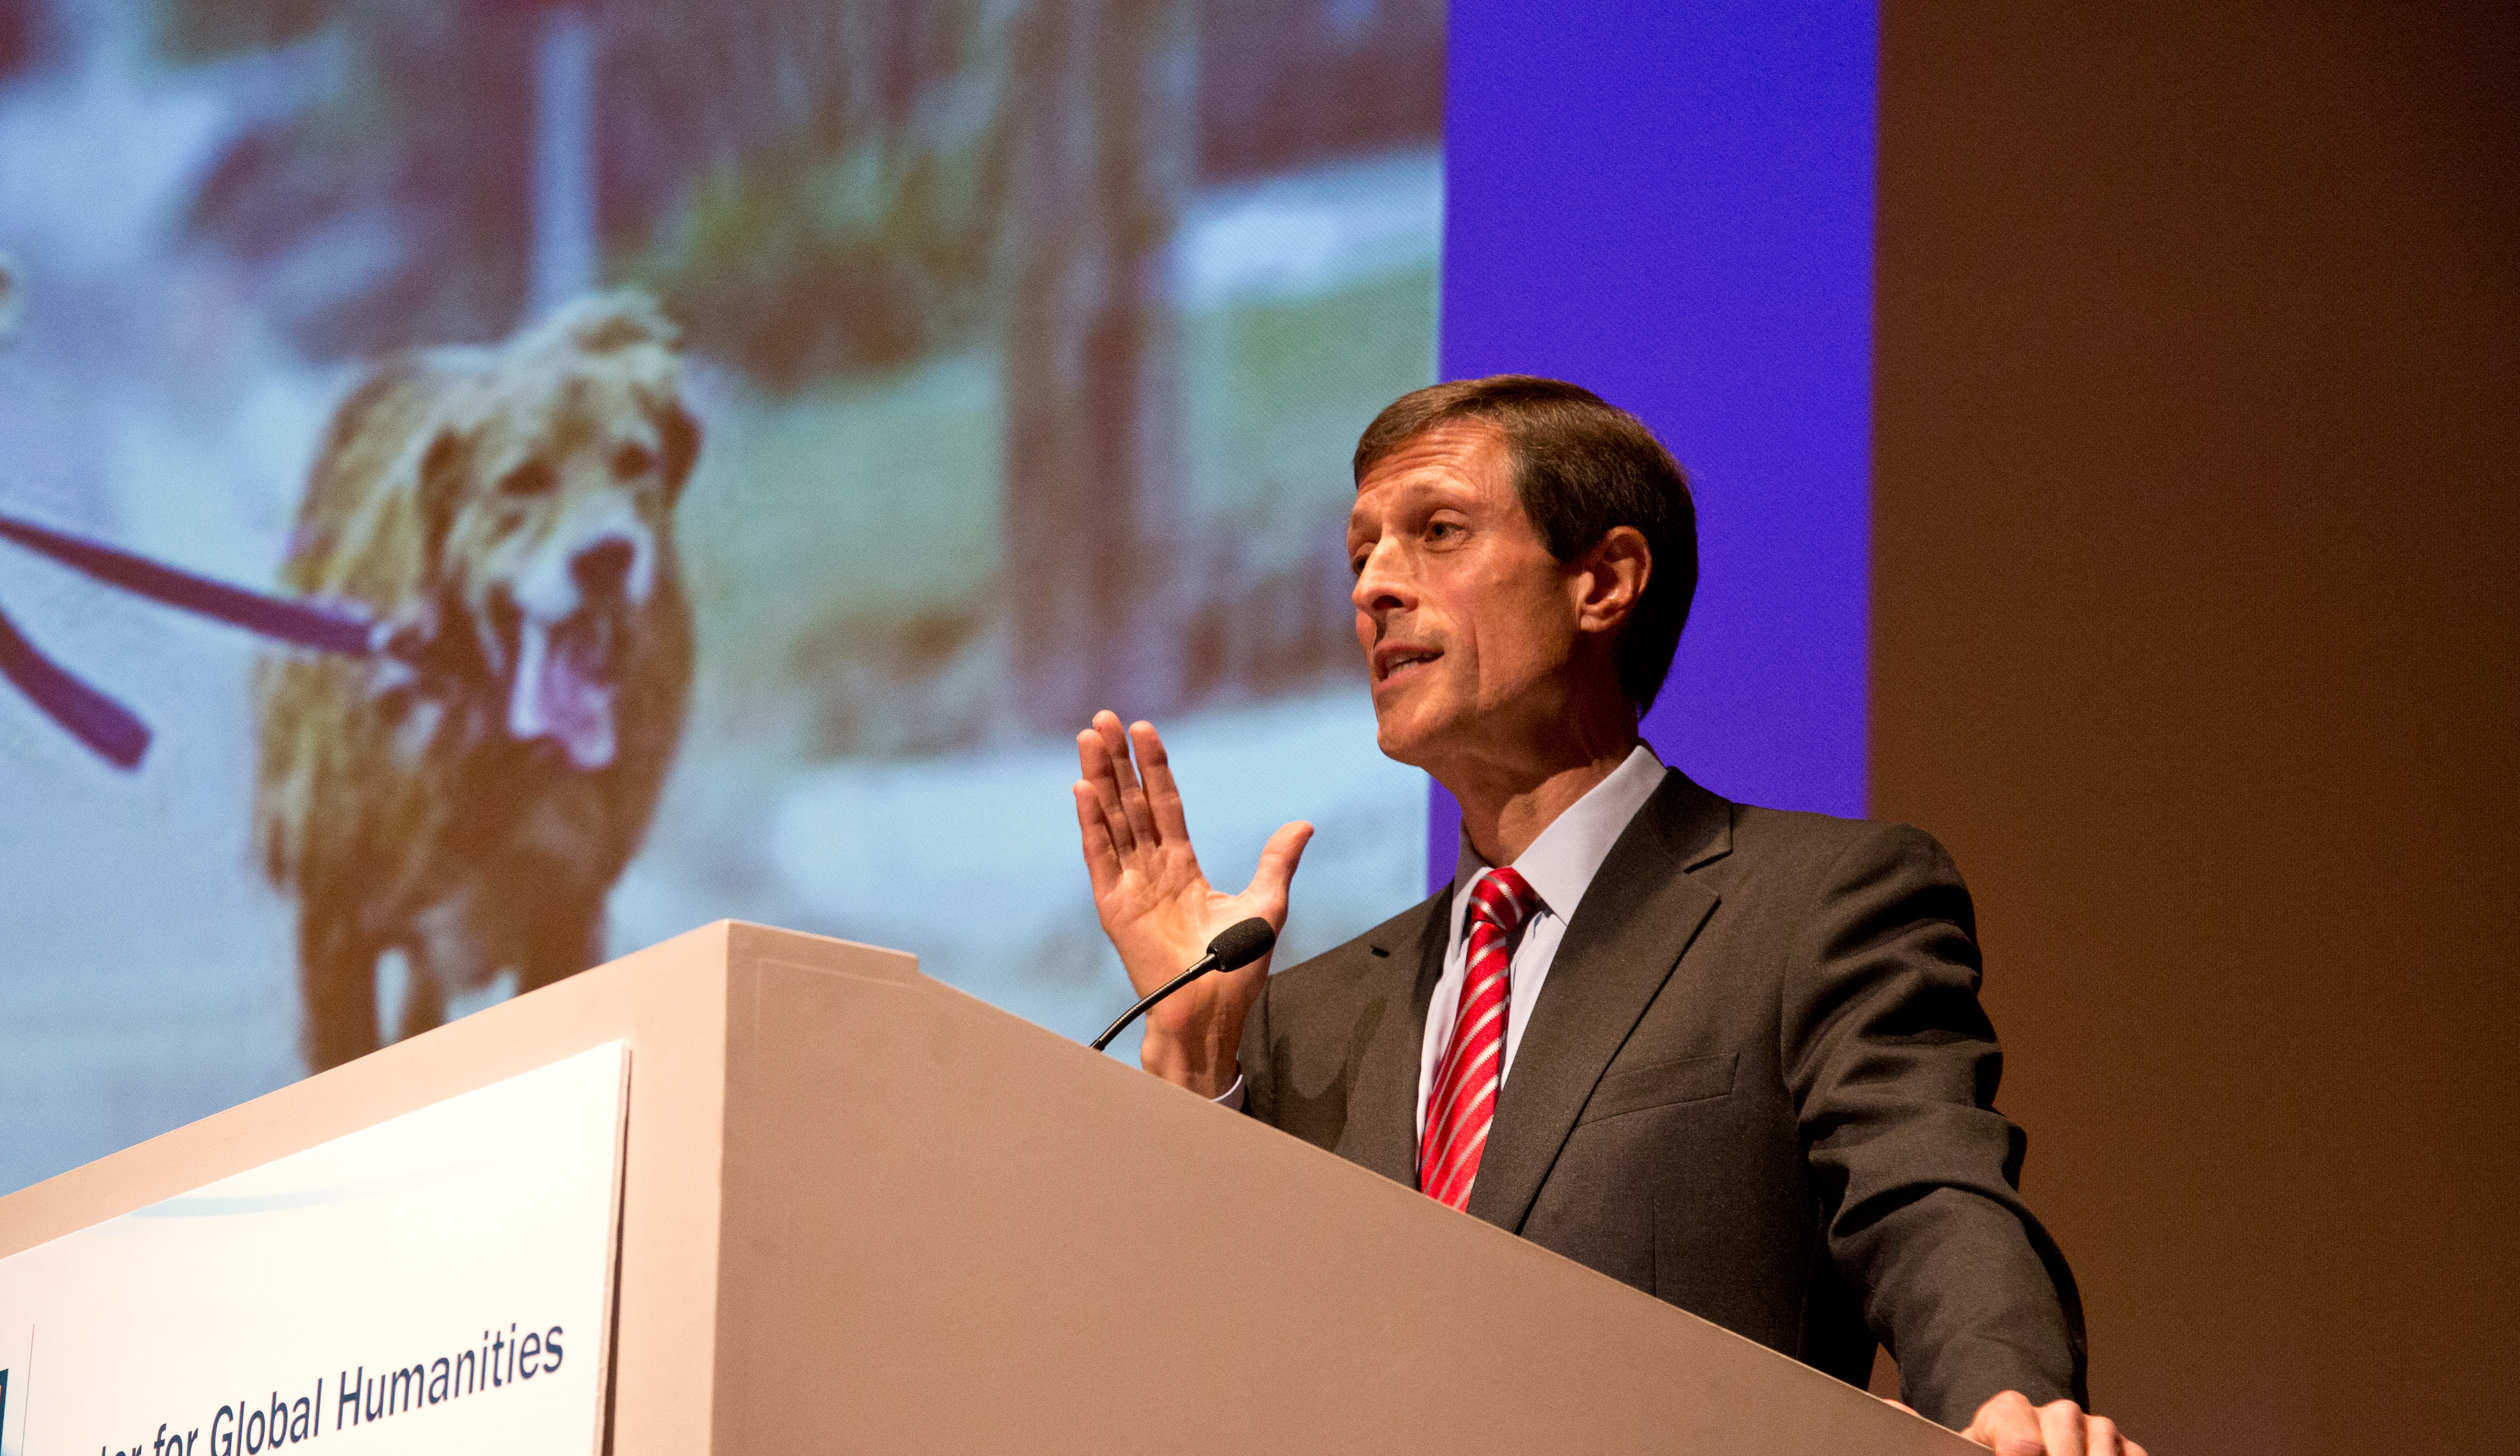 Neal Barnard lectures